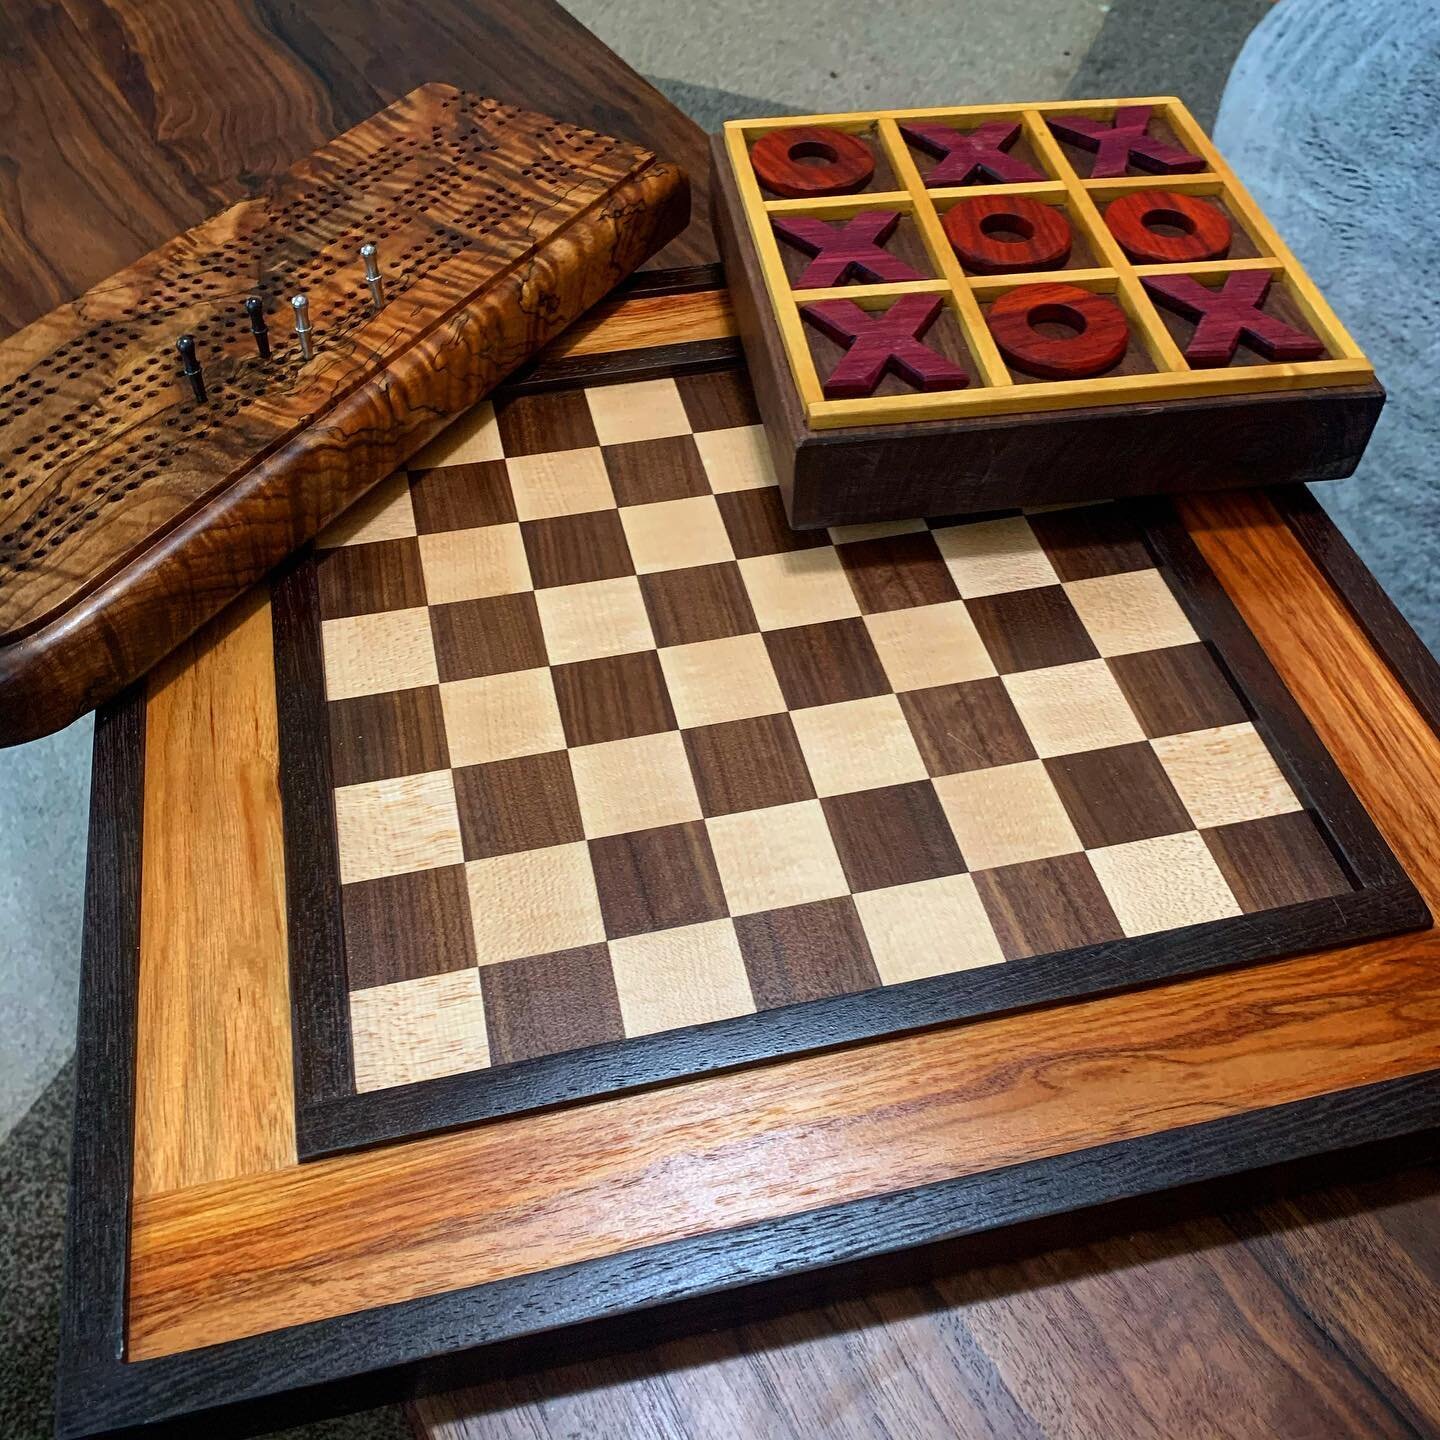 Sure love these wooden games we&rsquo;ve made. Definitely makes the experience that much better, knowing all that went into making them.